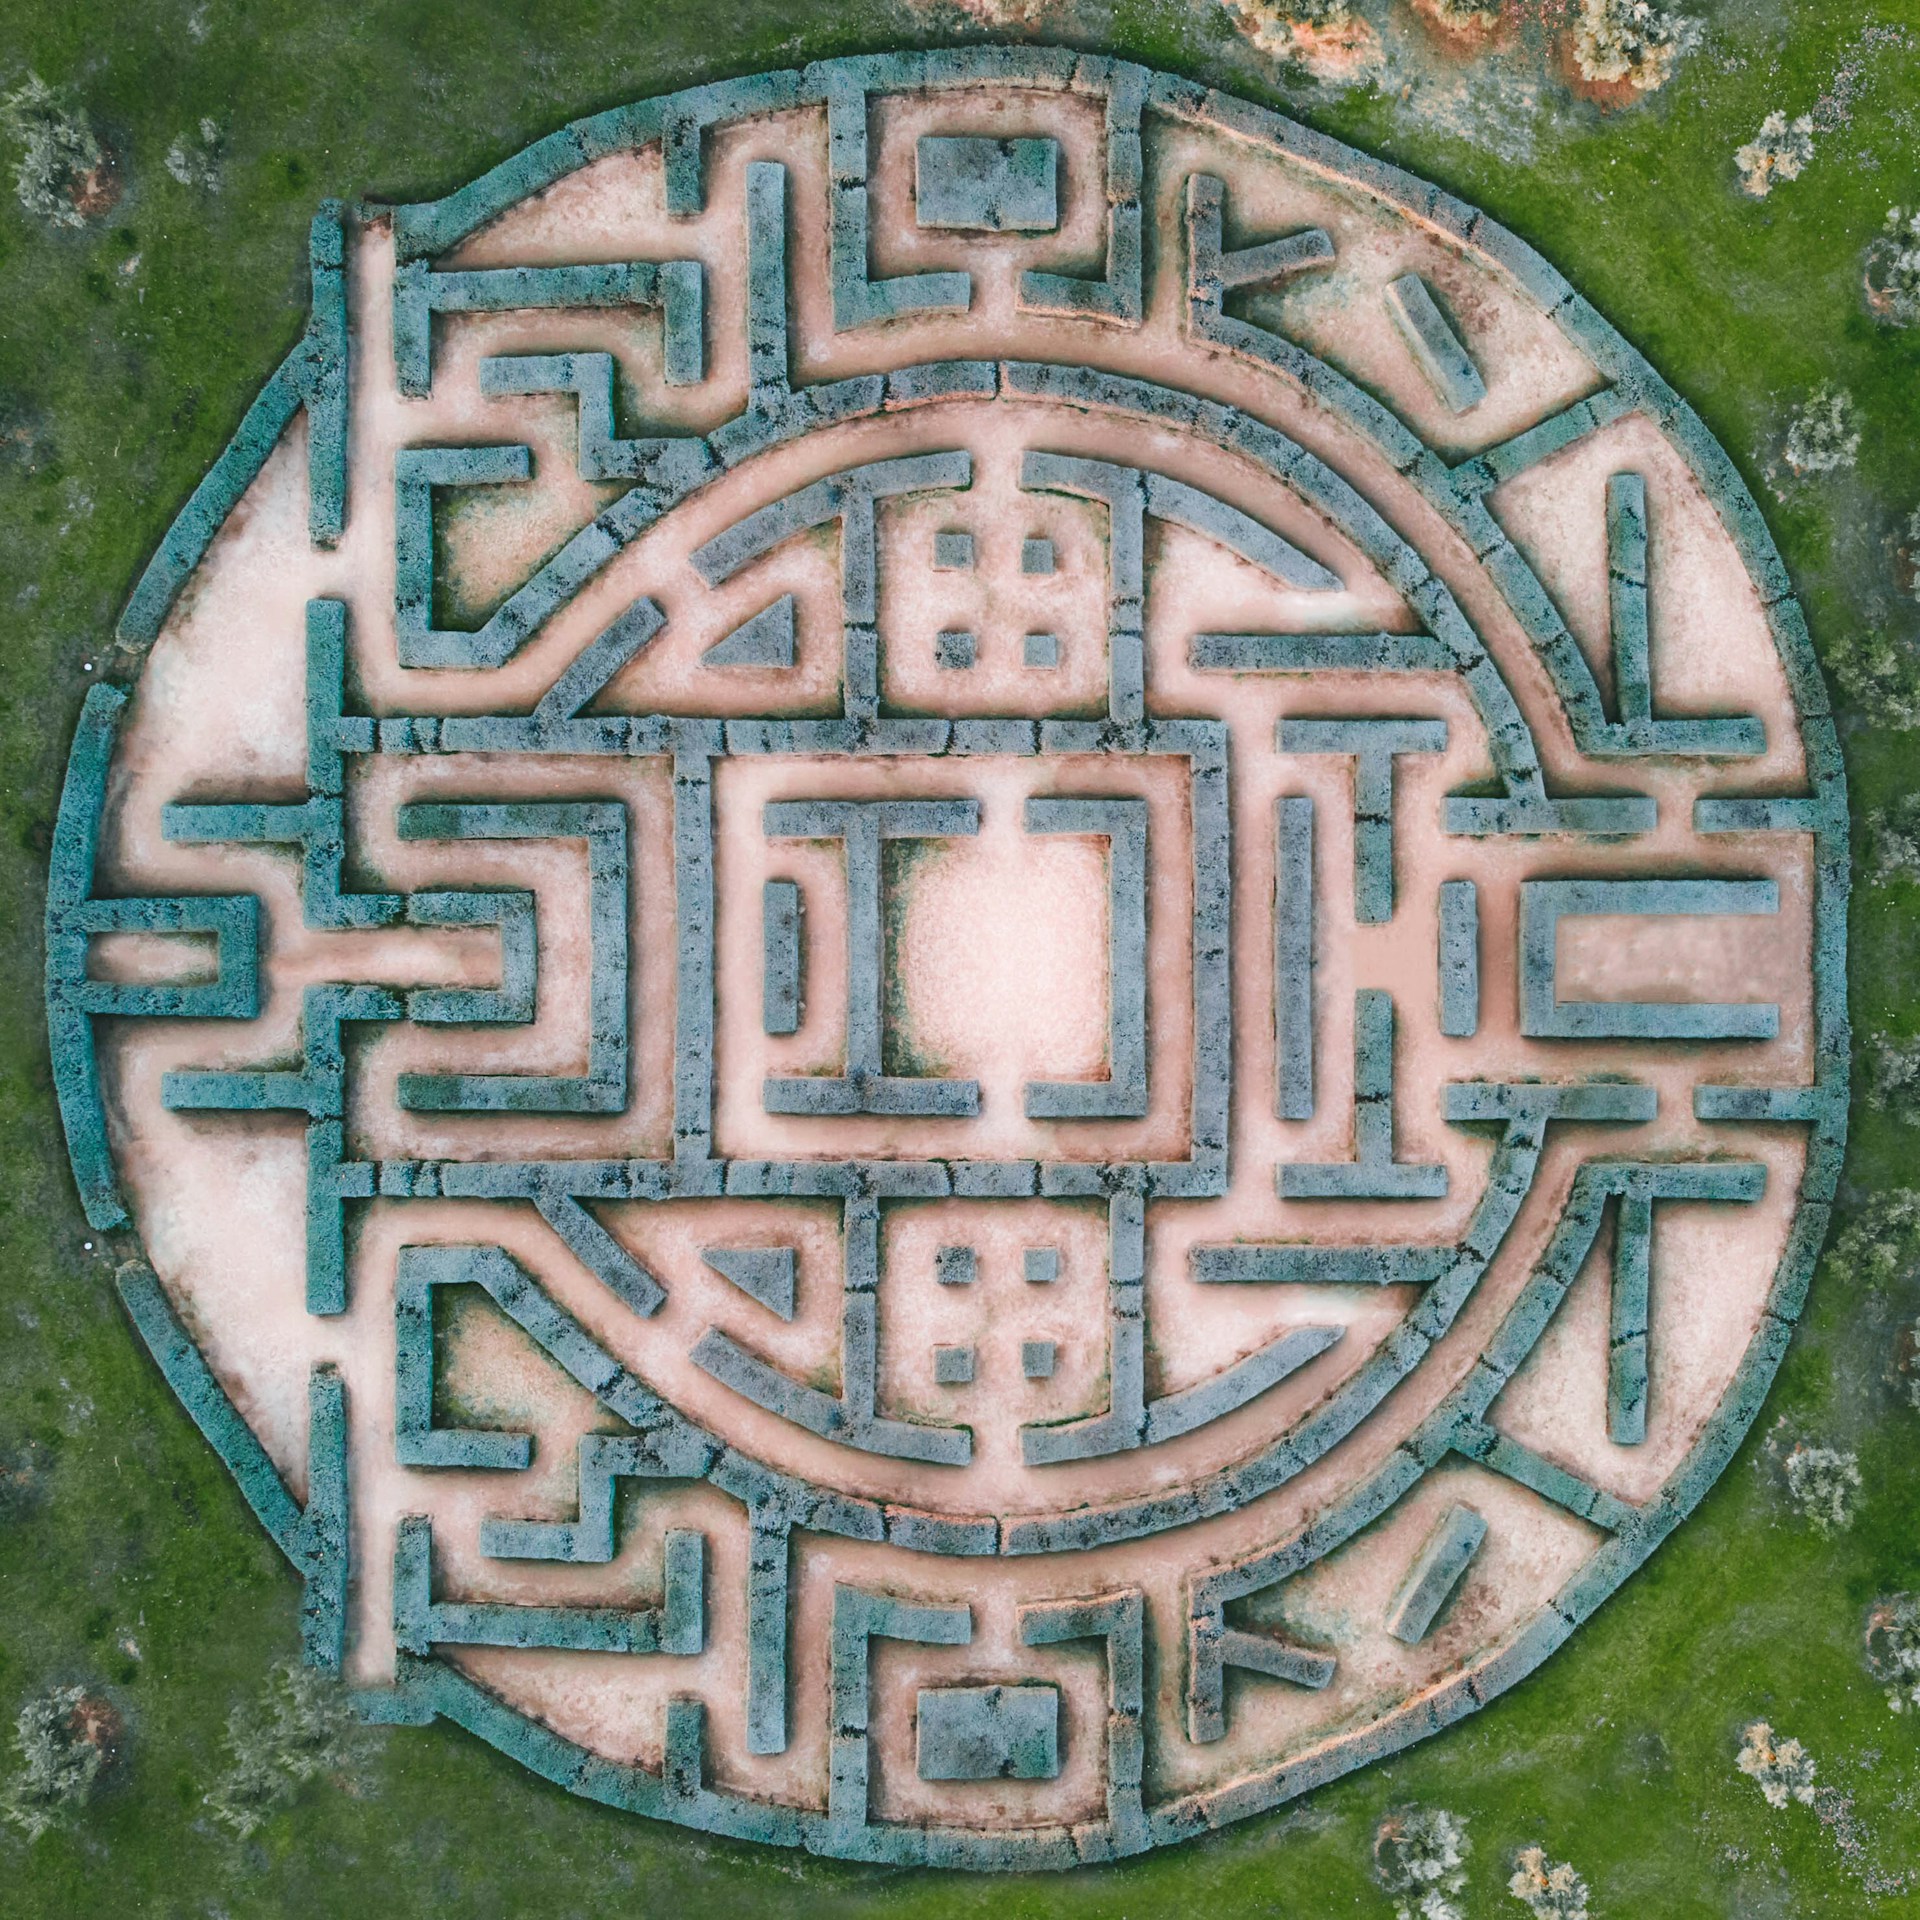 Labyrinth Images Free Download 1920x1920